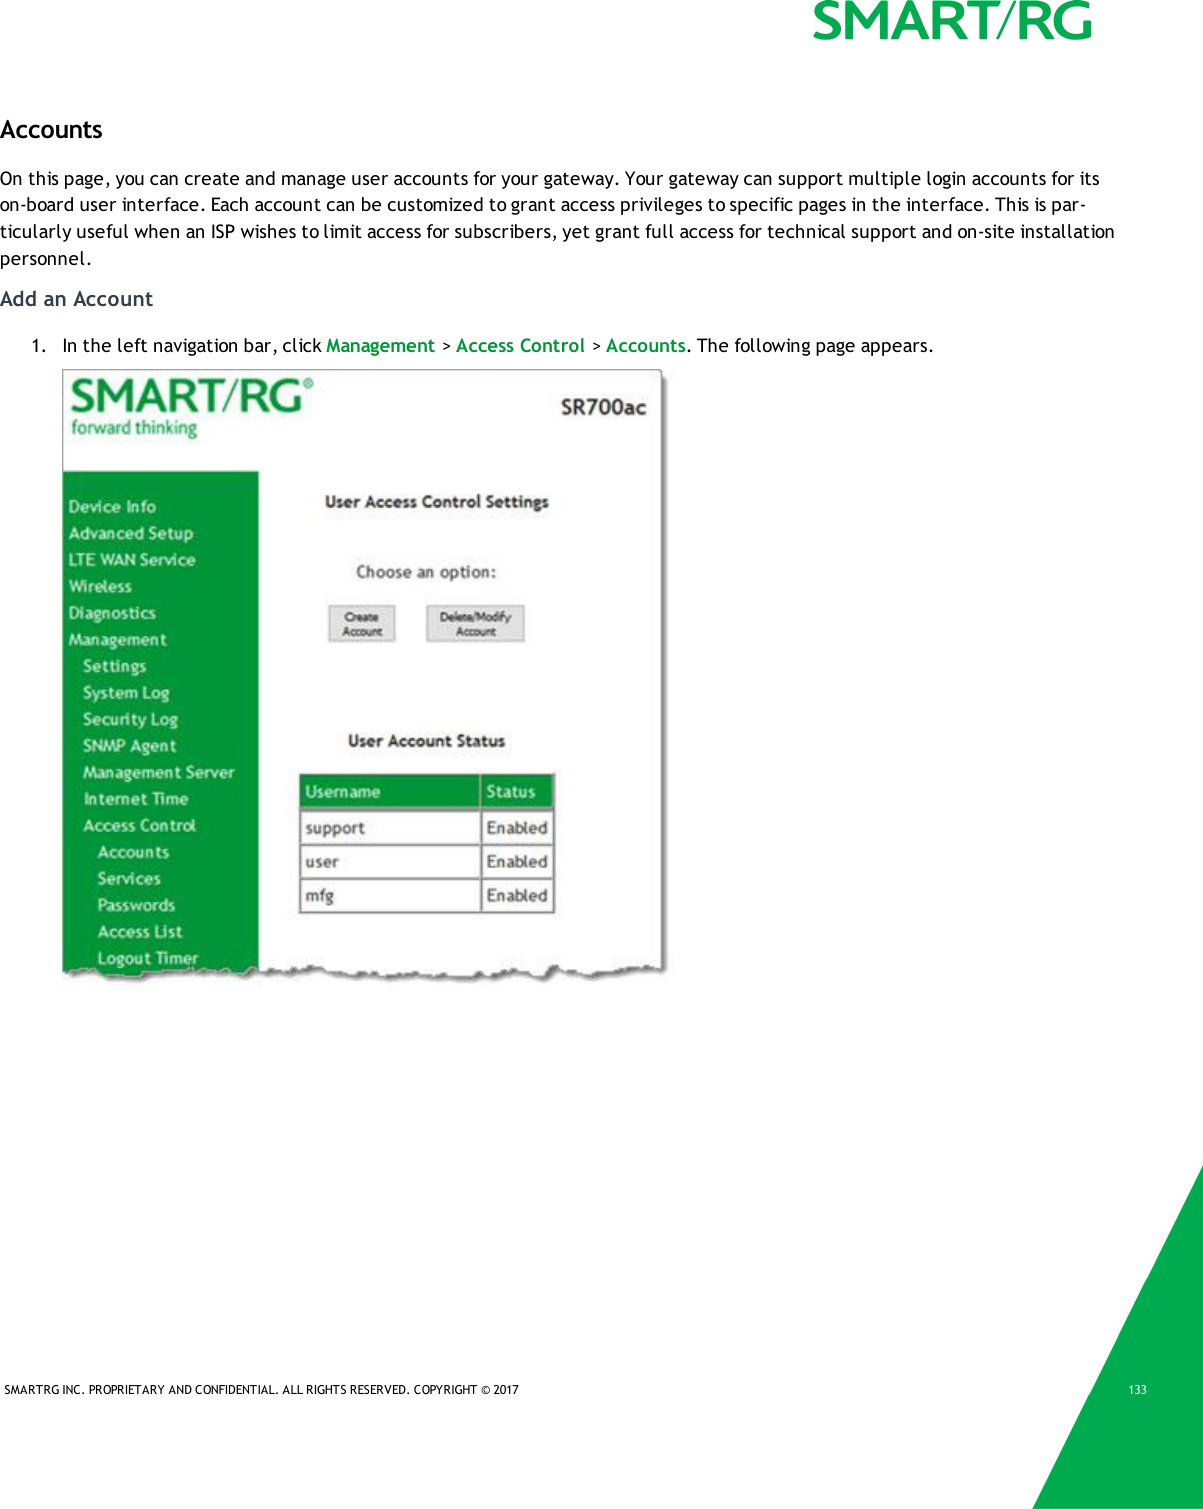 SMARTRG INC. PROPRIETARY AND CONFIDENTIAL. ALL RIGHTS RESERVED. COPYRIGHT © 2017 133AccountsOn this page, you can create and manage user accounts for your gateway. Your gateway can support multiple login accounts for itson-board user interface. Each account can be customized to grant access privileges to specific pages in the interface. This is par-ticularly useful when an ISP wishes to limit access for subscribers, yet grant full access for technical support and on-site installationpersonnel.Add an Account1. In the left navigation bar, click Management &gt;Access Control &gt;Accounts. The following page appears.